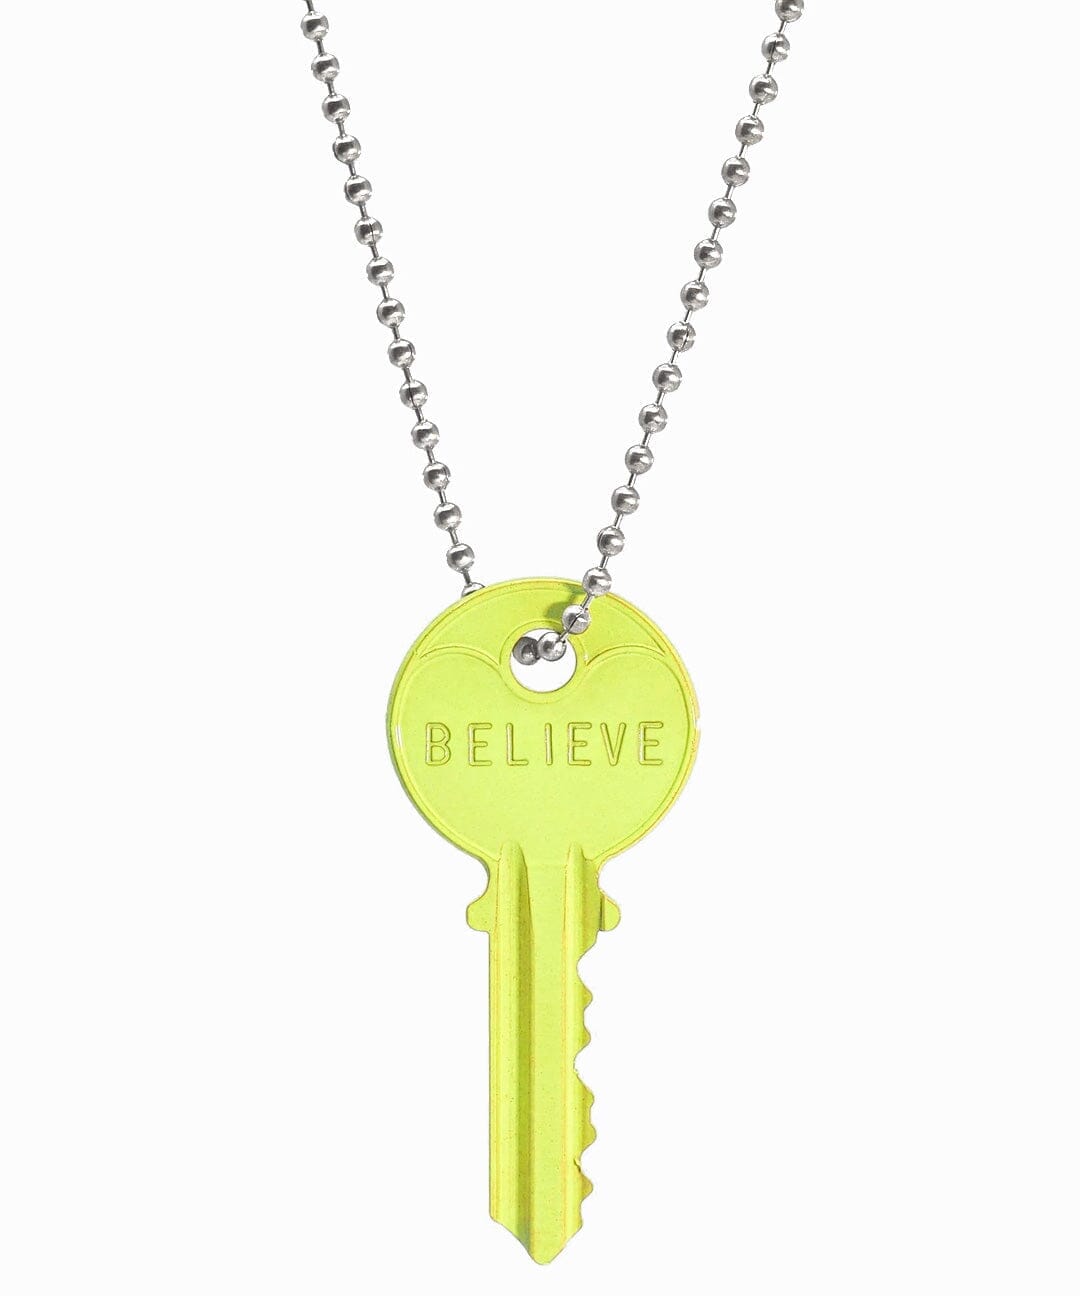 N - Neon Yellow Classic Ball Chain Key Necklace Necklaces The Giving Keys SILVER 